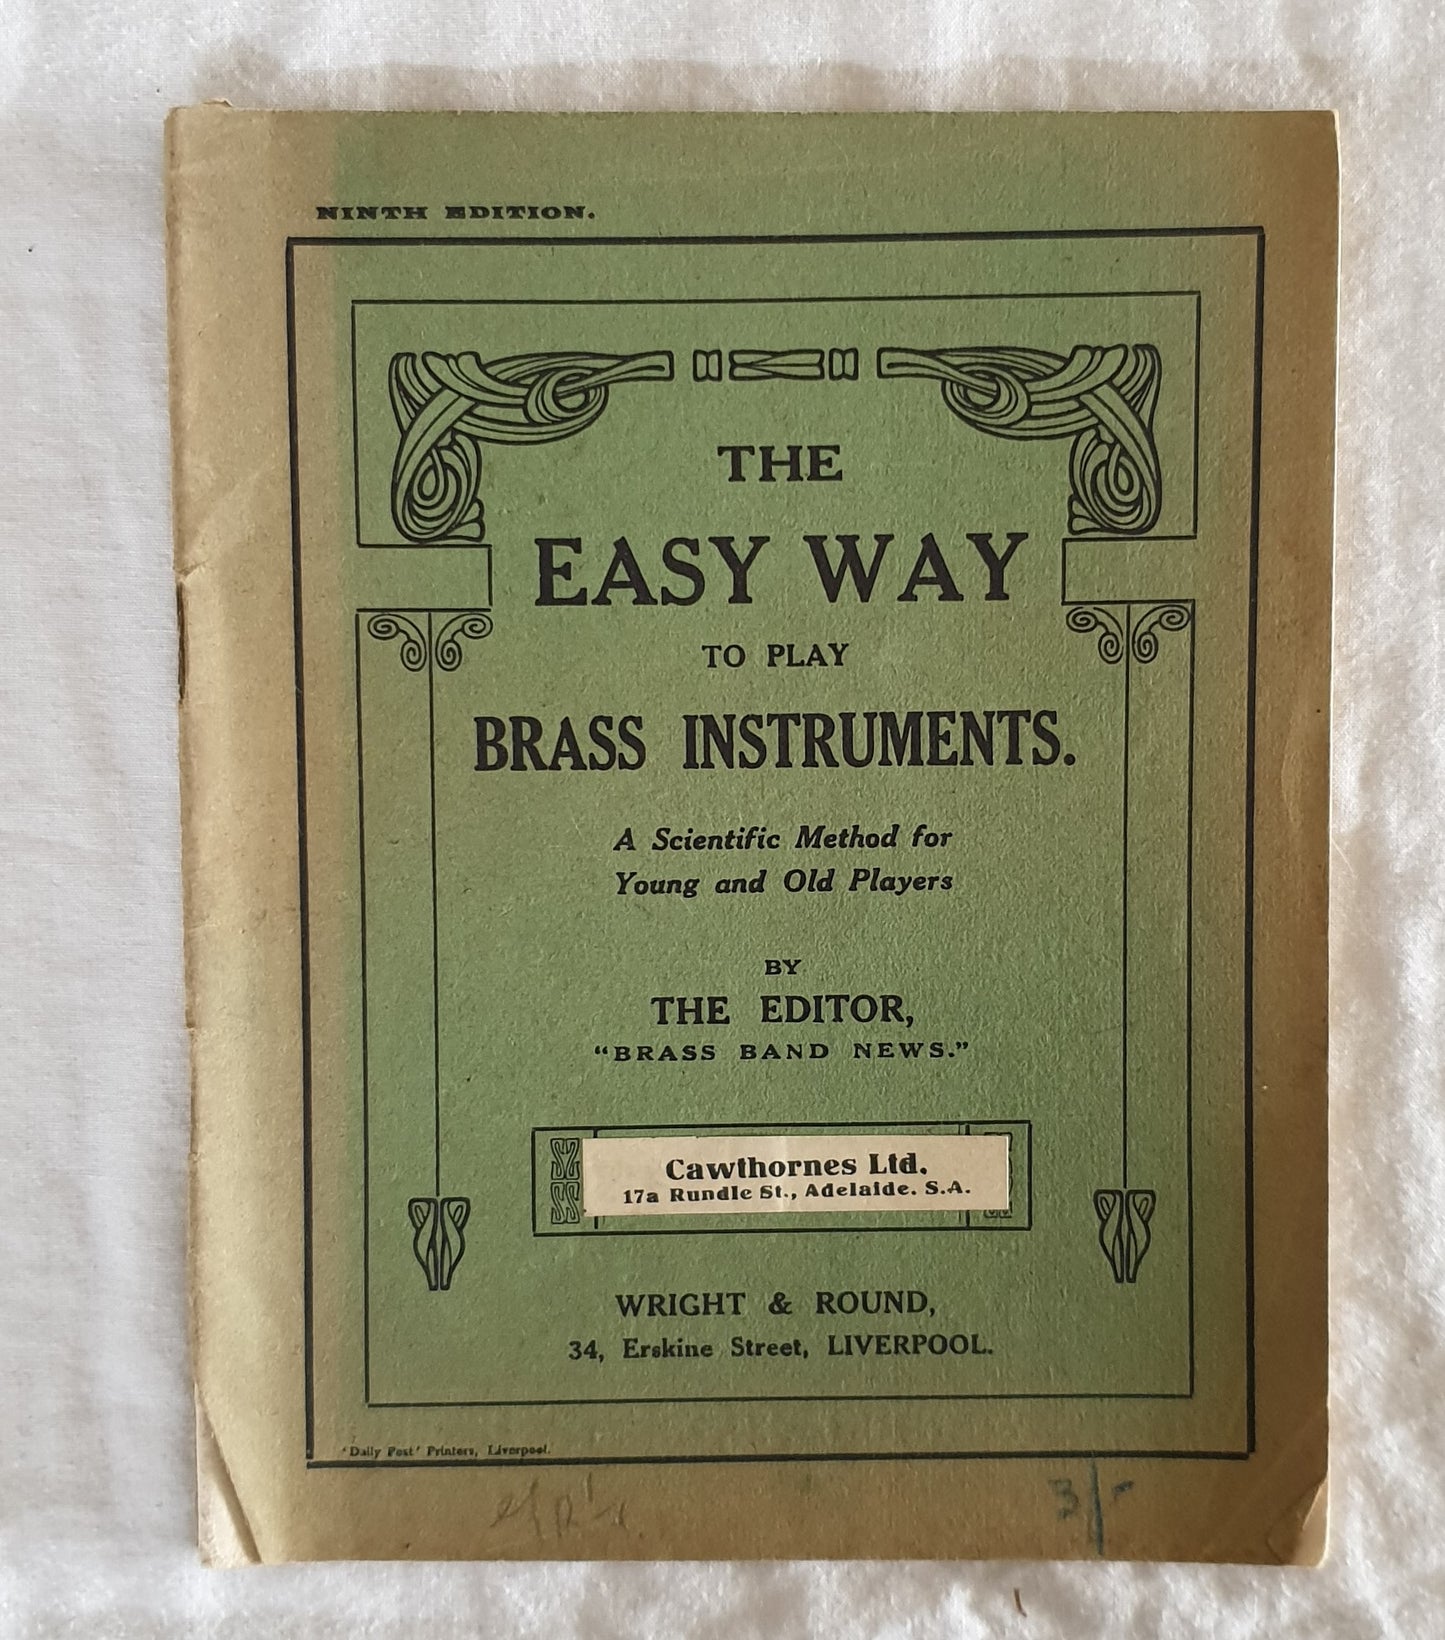 The Easy Way to Play Brass Instruments by Brass Band News